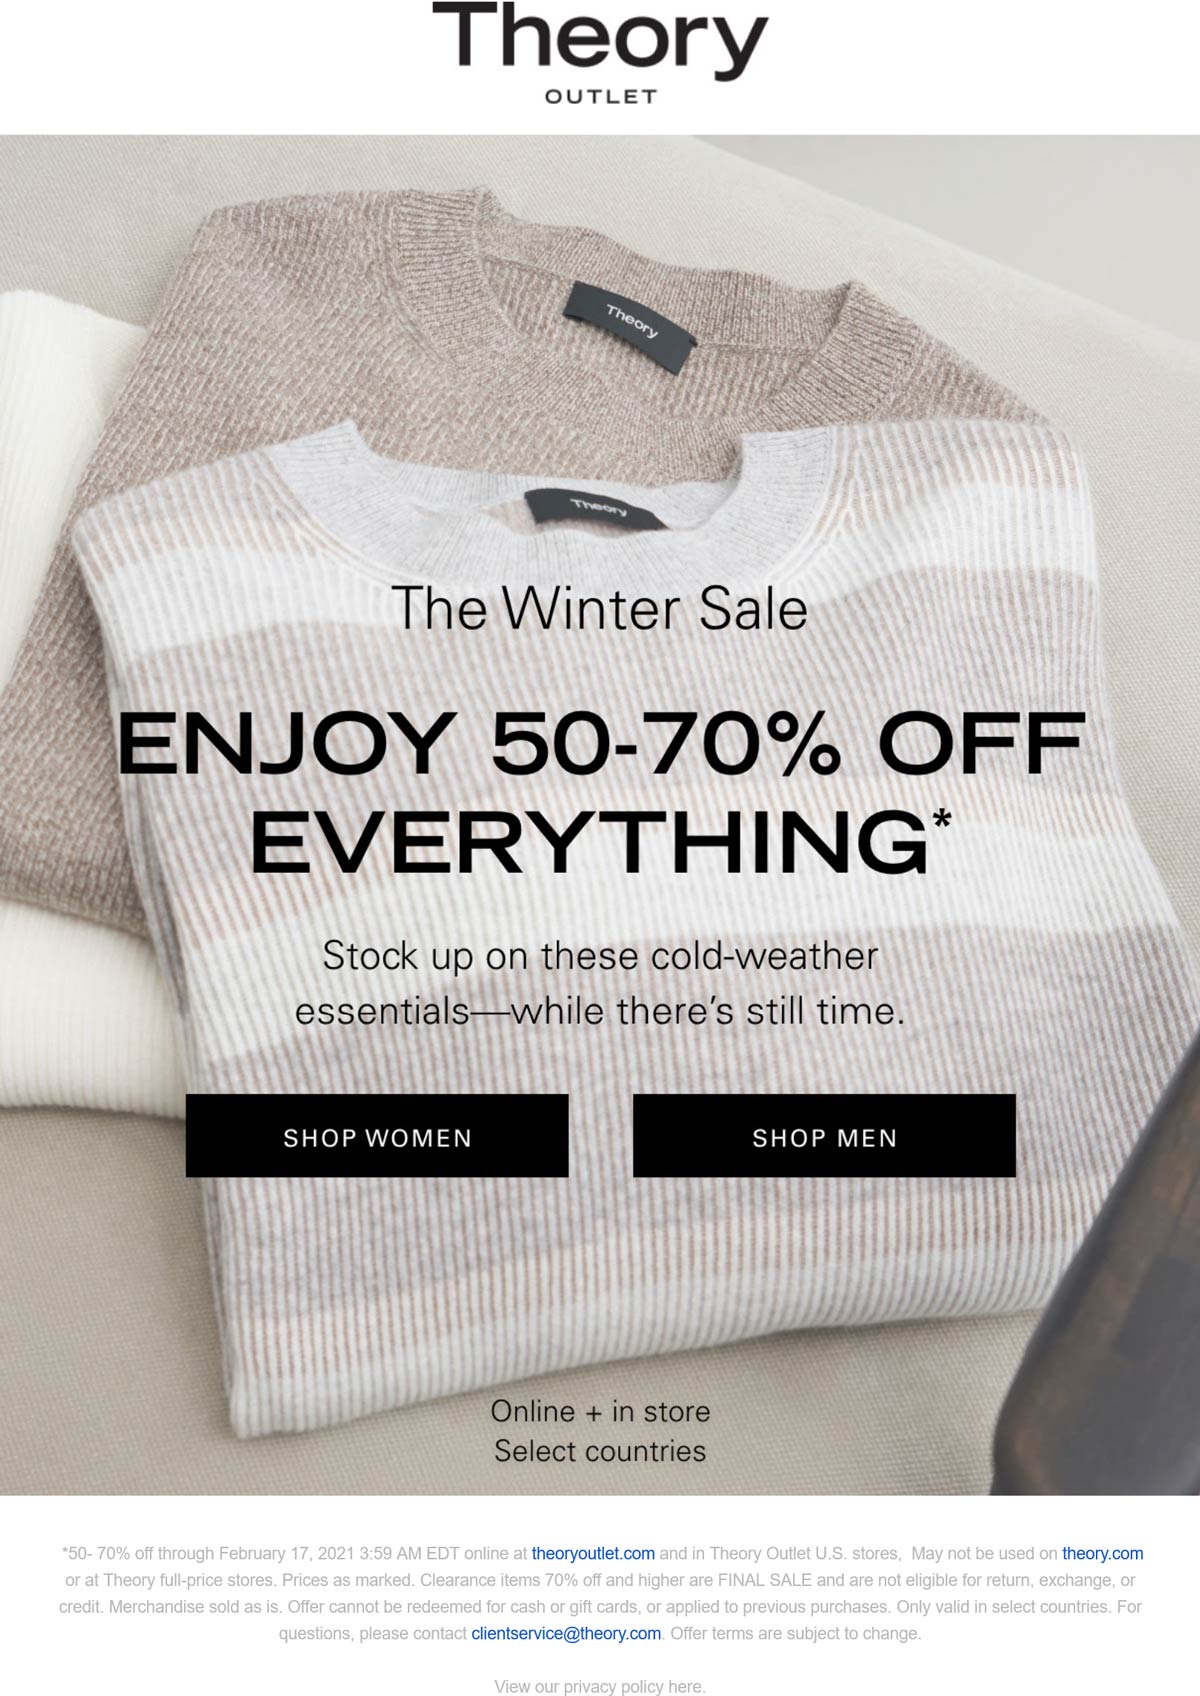 Theory Outlet stores Coupon  50-70% off everything at Theory Outlet, ditto online #theoryoutlet 